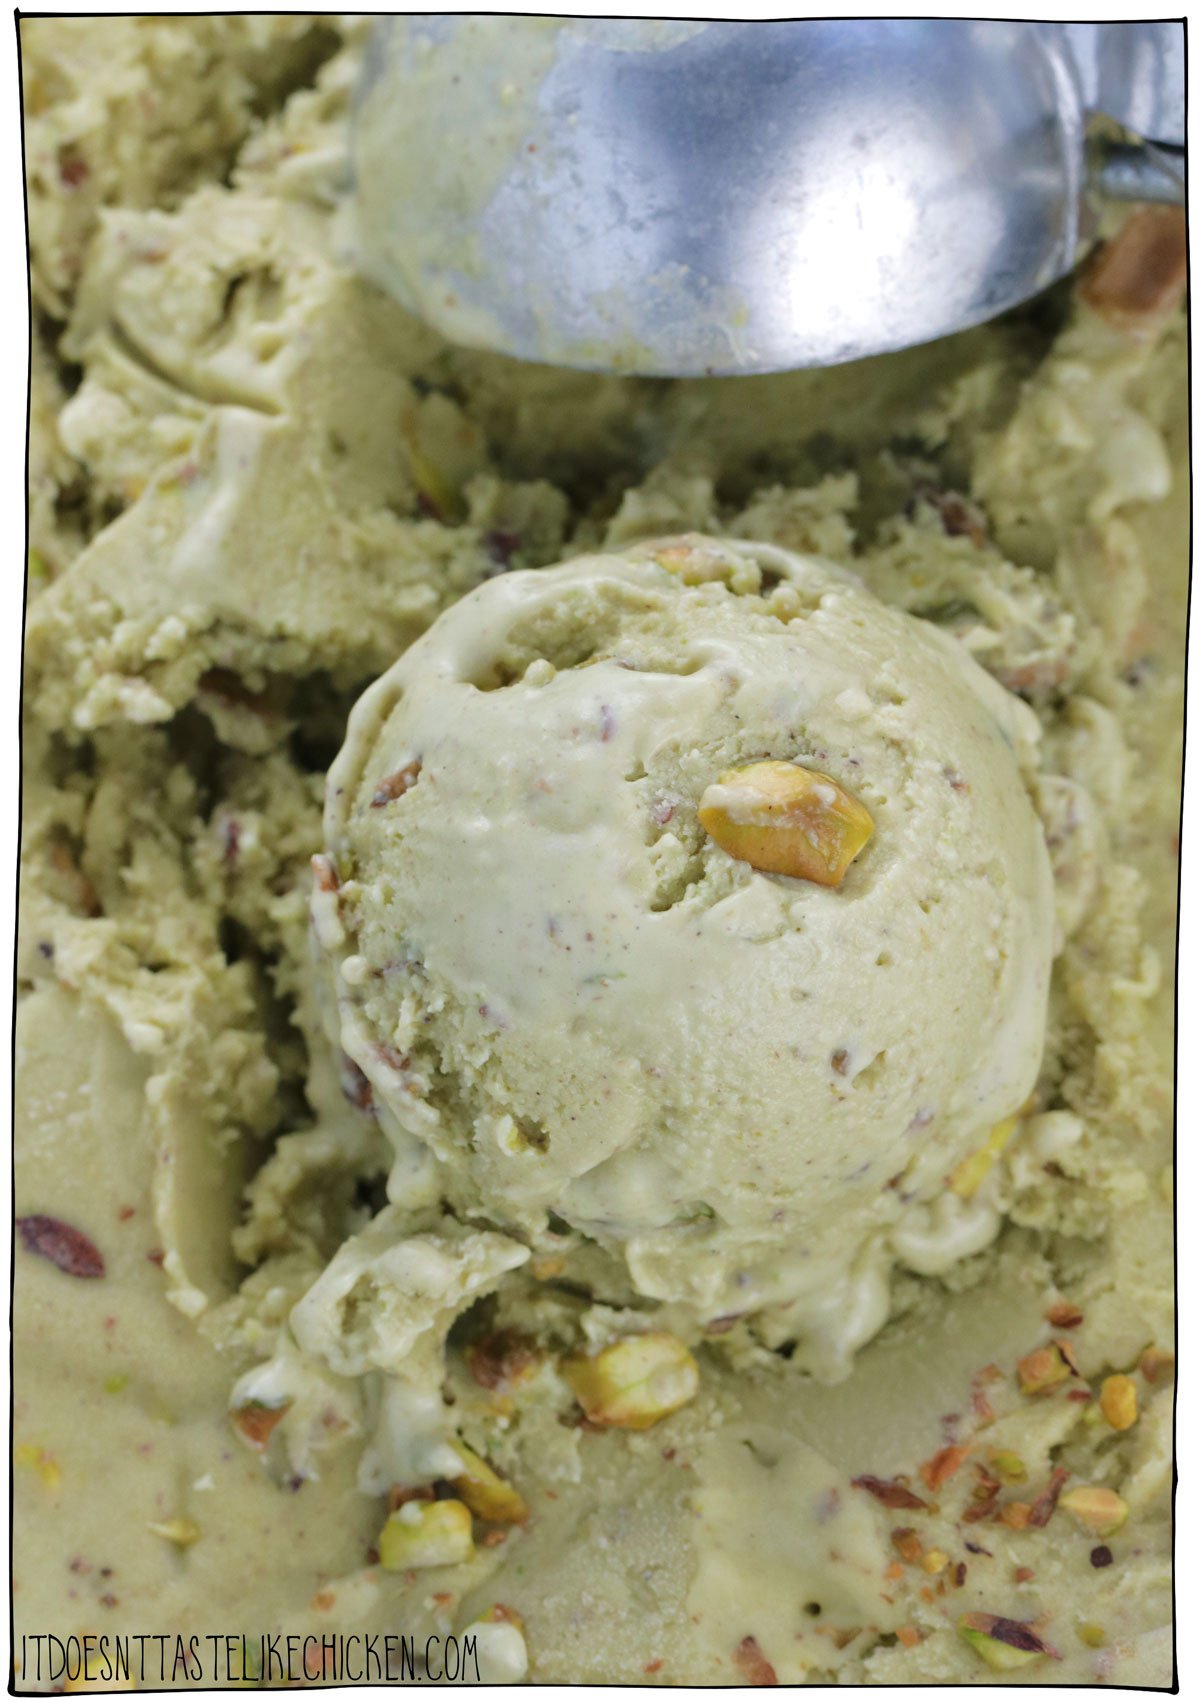 The Best Vegan Pistachio Ice Cream is incredibly creamy, and nutty, with hints of vanilla. This ice cream recipe is easy to make and requires no coconut and no banana. Instead, this vegan ice cream is made with just 7 ingredients: plant-based milk of choice, pistachios, cashews (for added richness and creaminess), sugar, vanilla, almond extract, and a pinch of salt. You can use this recipe in an ice cream maker or learn how to make ice cream in a blender! #itdoesnttastelikechicken #icecream